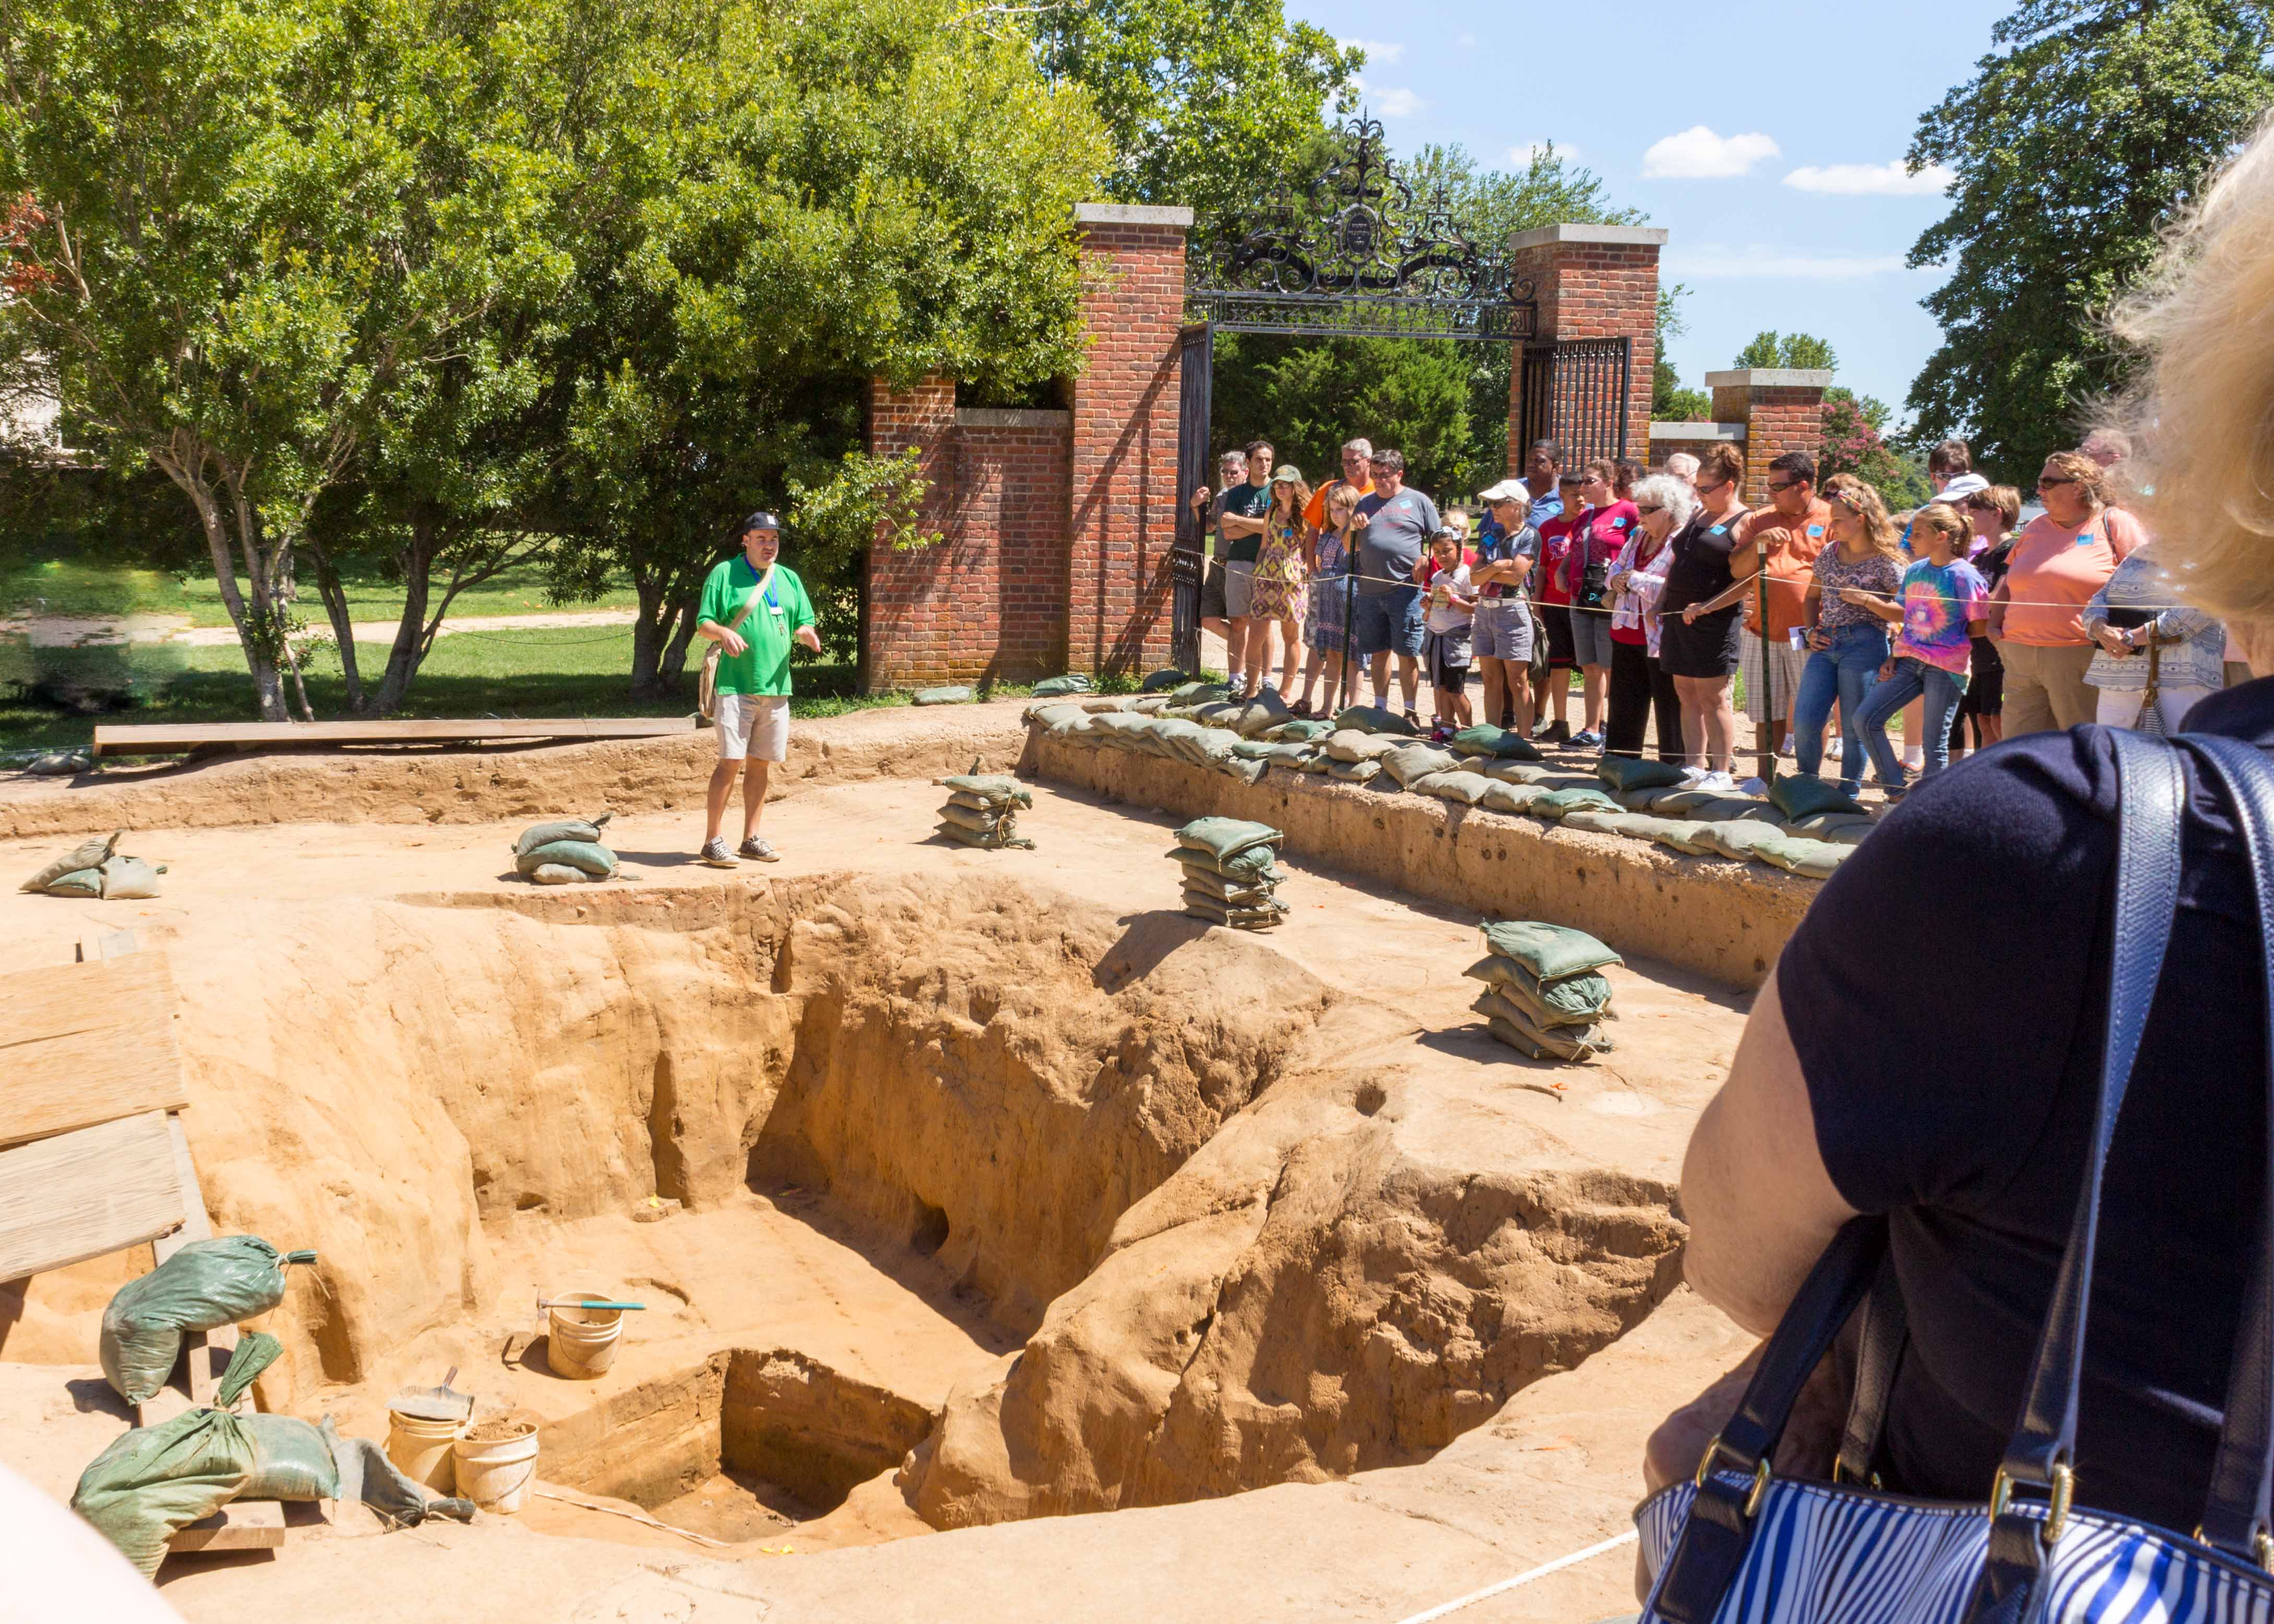 Historic Jamestowne offers a true-as-we-know-it look at how Jamestown came to be the first permanent English settlement in America. Archaeological digs continue to shed light on what that early experience was like. (Kevin Kaiser | Travel Beat Magazine)